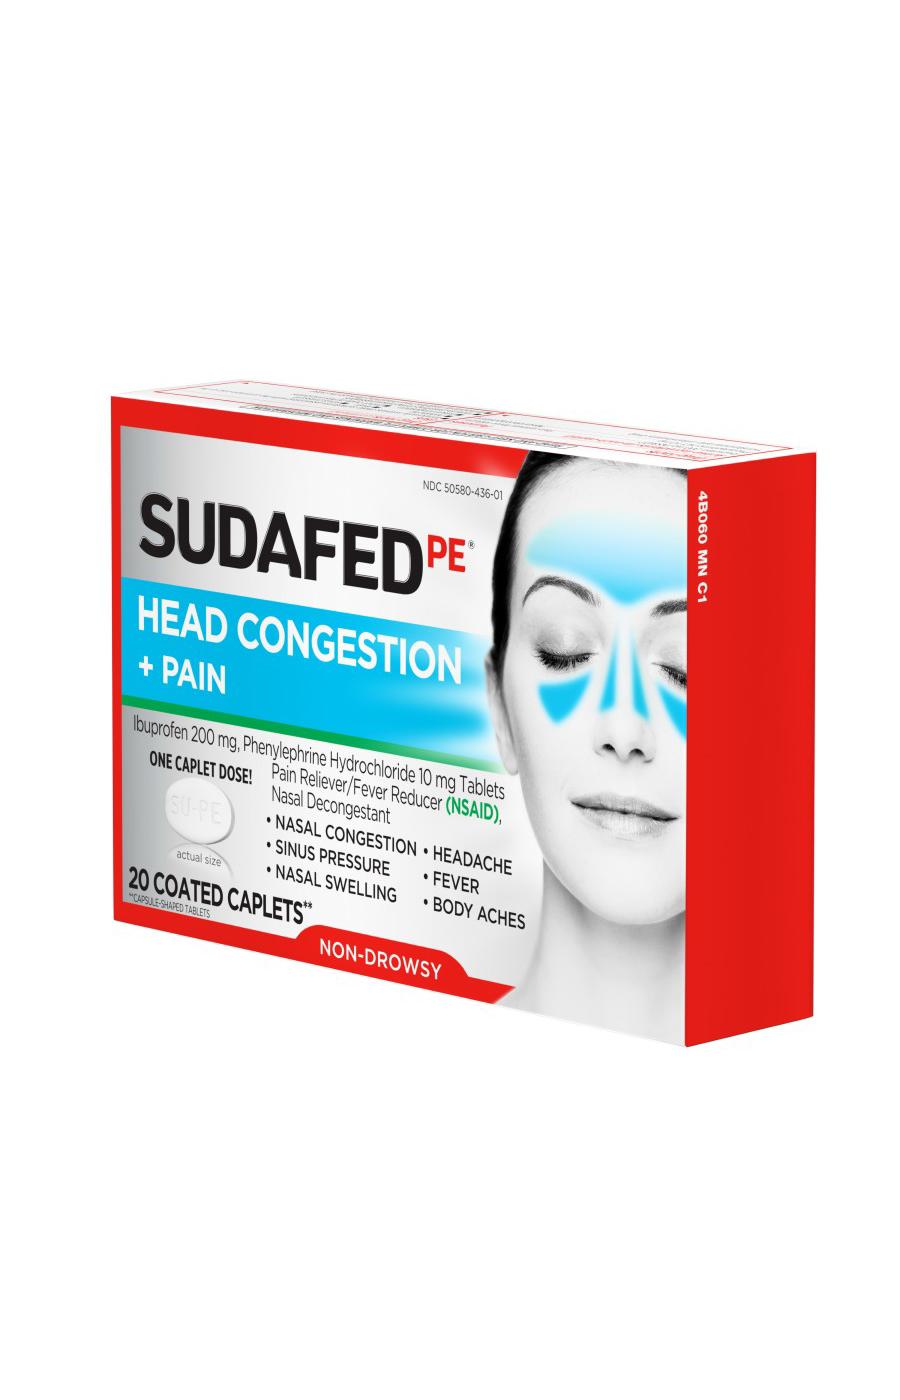 Sudafed PE Head Congestion + Pain Coated Tablets; image 4 of 6